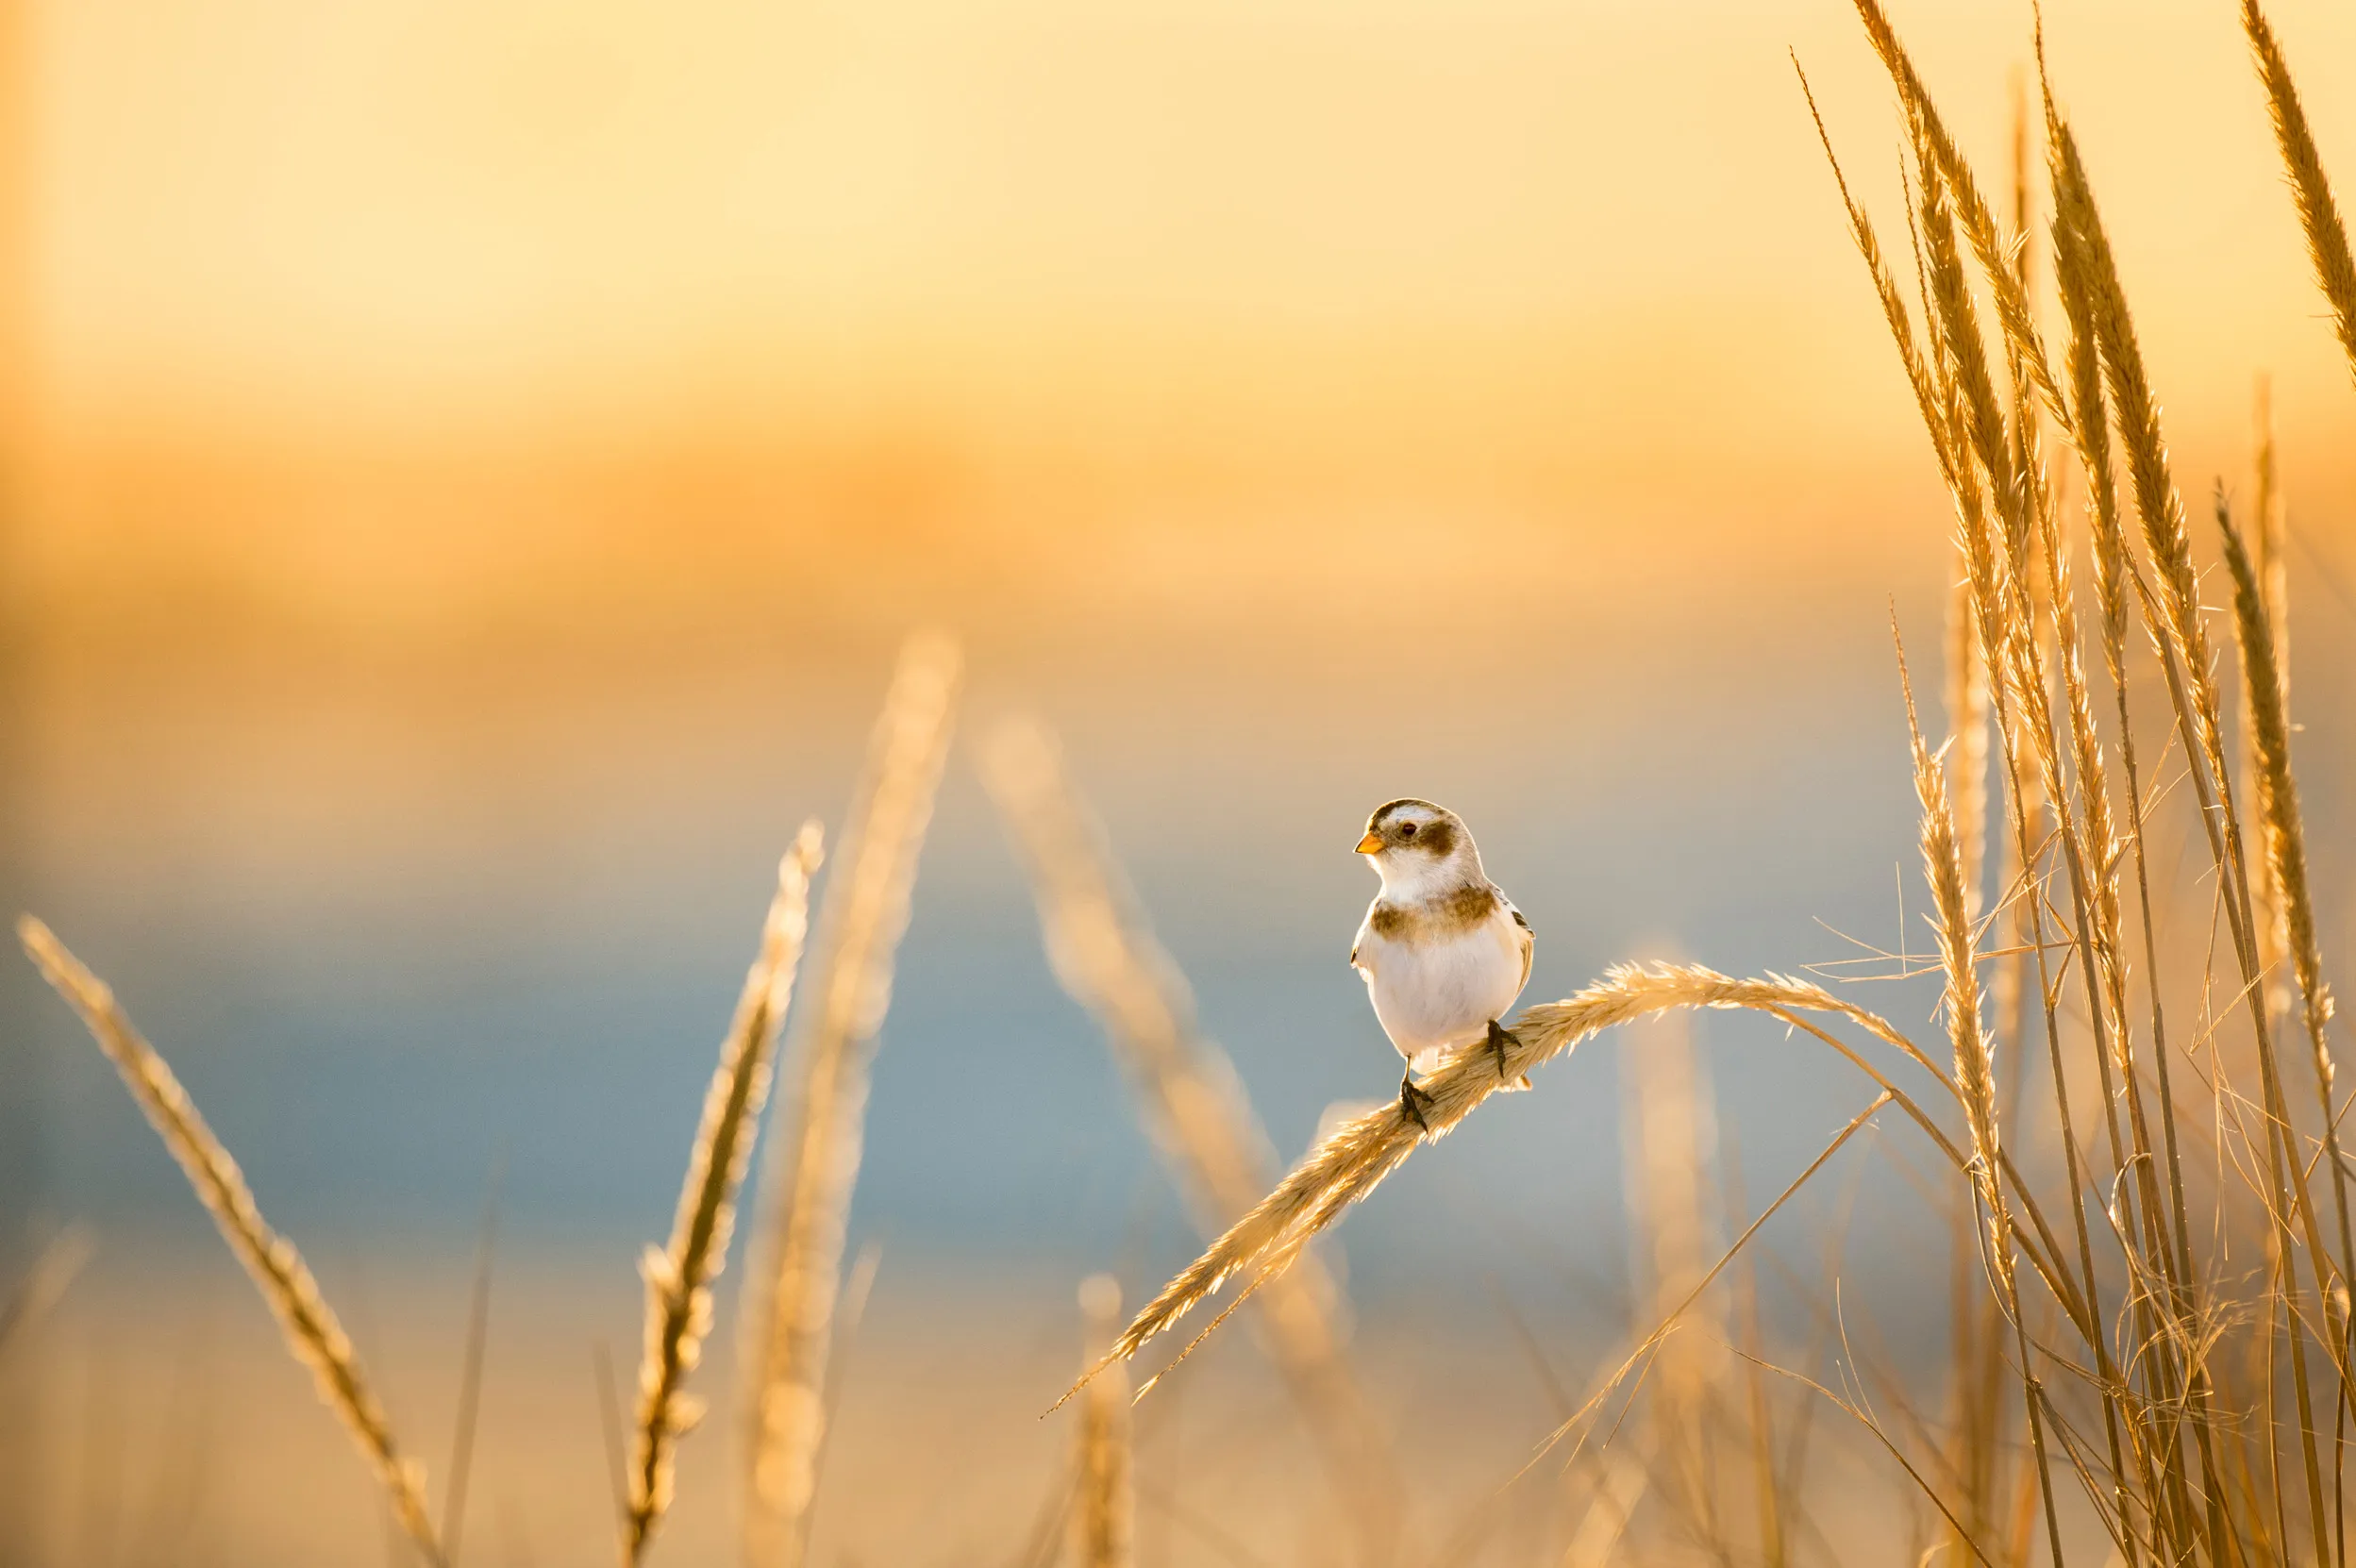 A lone female Snow Bunting perched on some dune grass in evening winter sun.